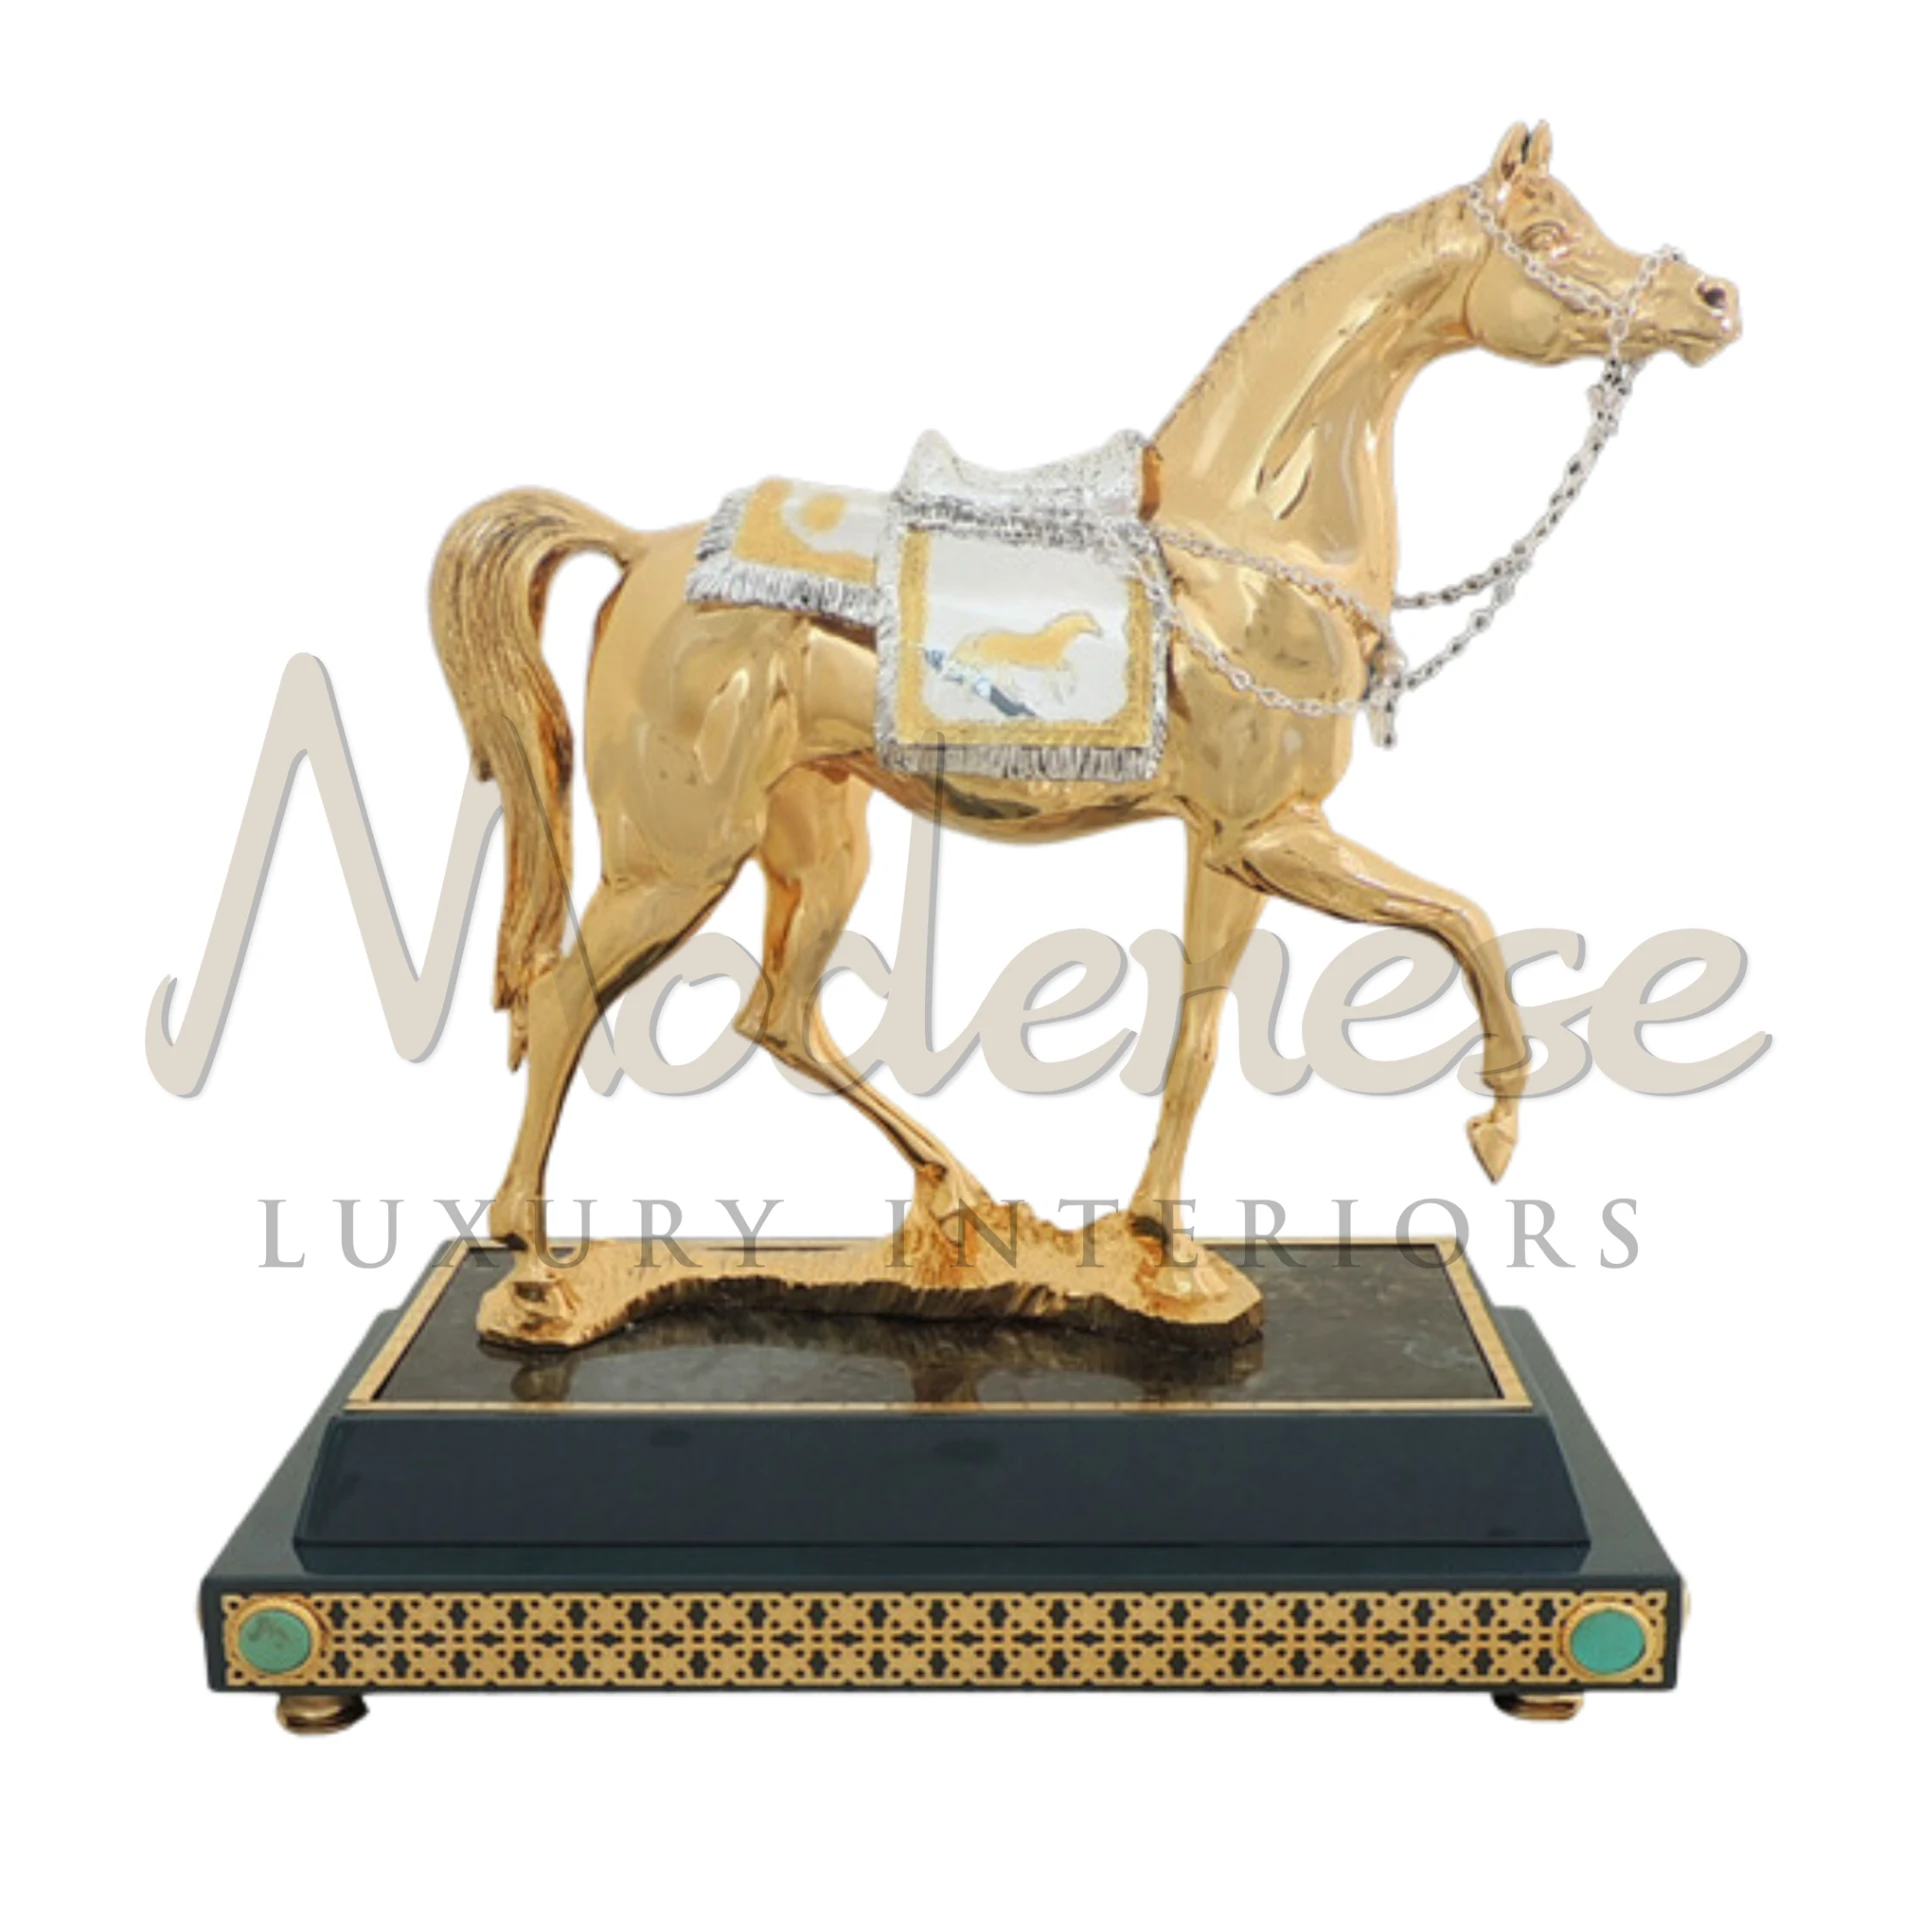 Imperial Gold Horse statuette, embodying power and strength, with intricate details, ideal for adding opulence to luxury and classic style interiors.